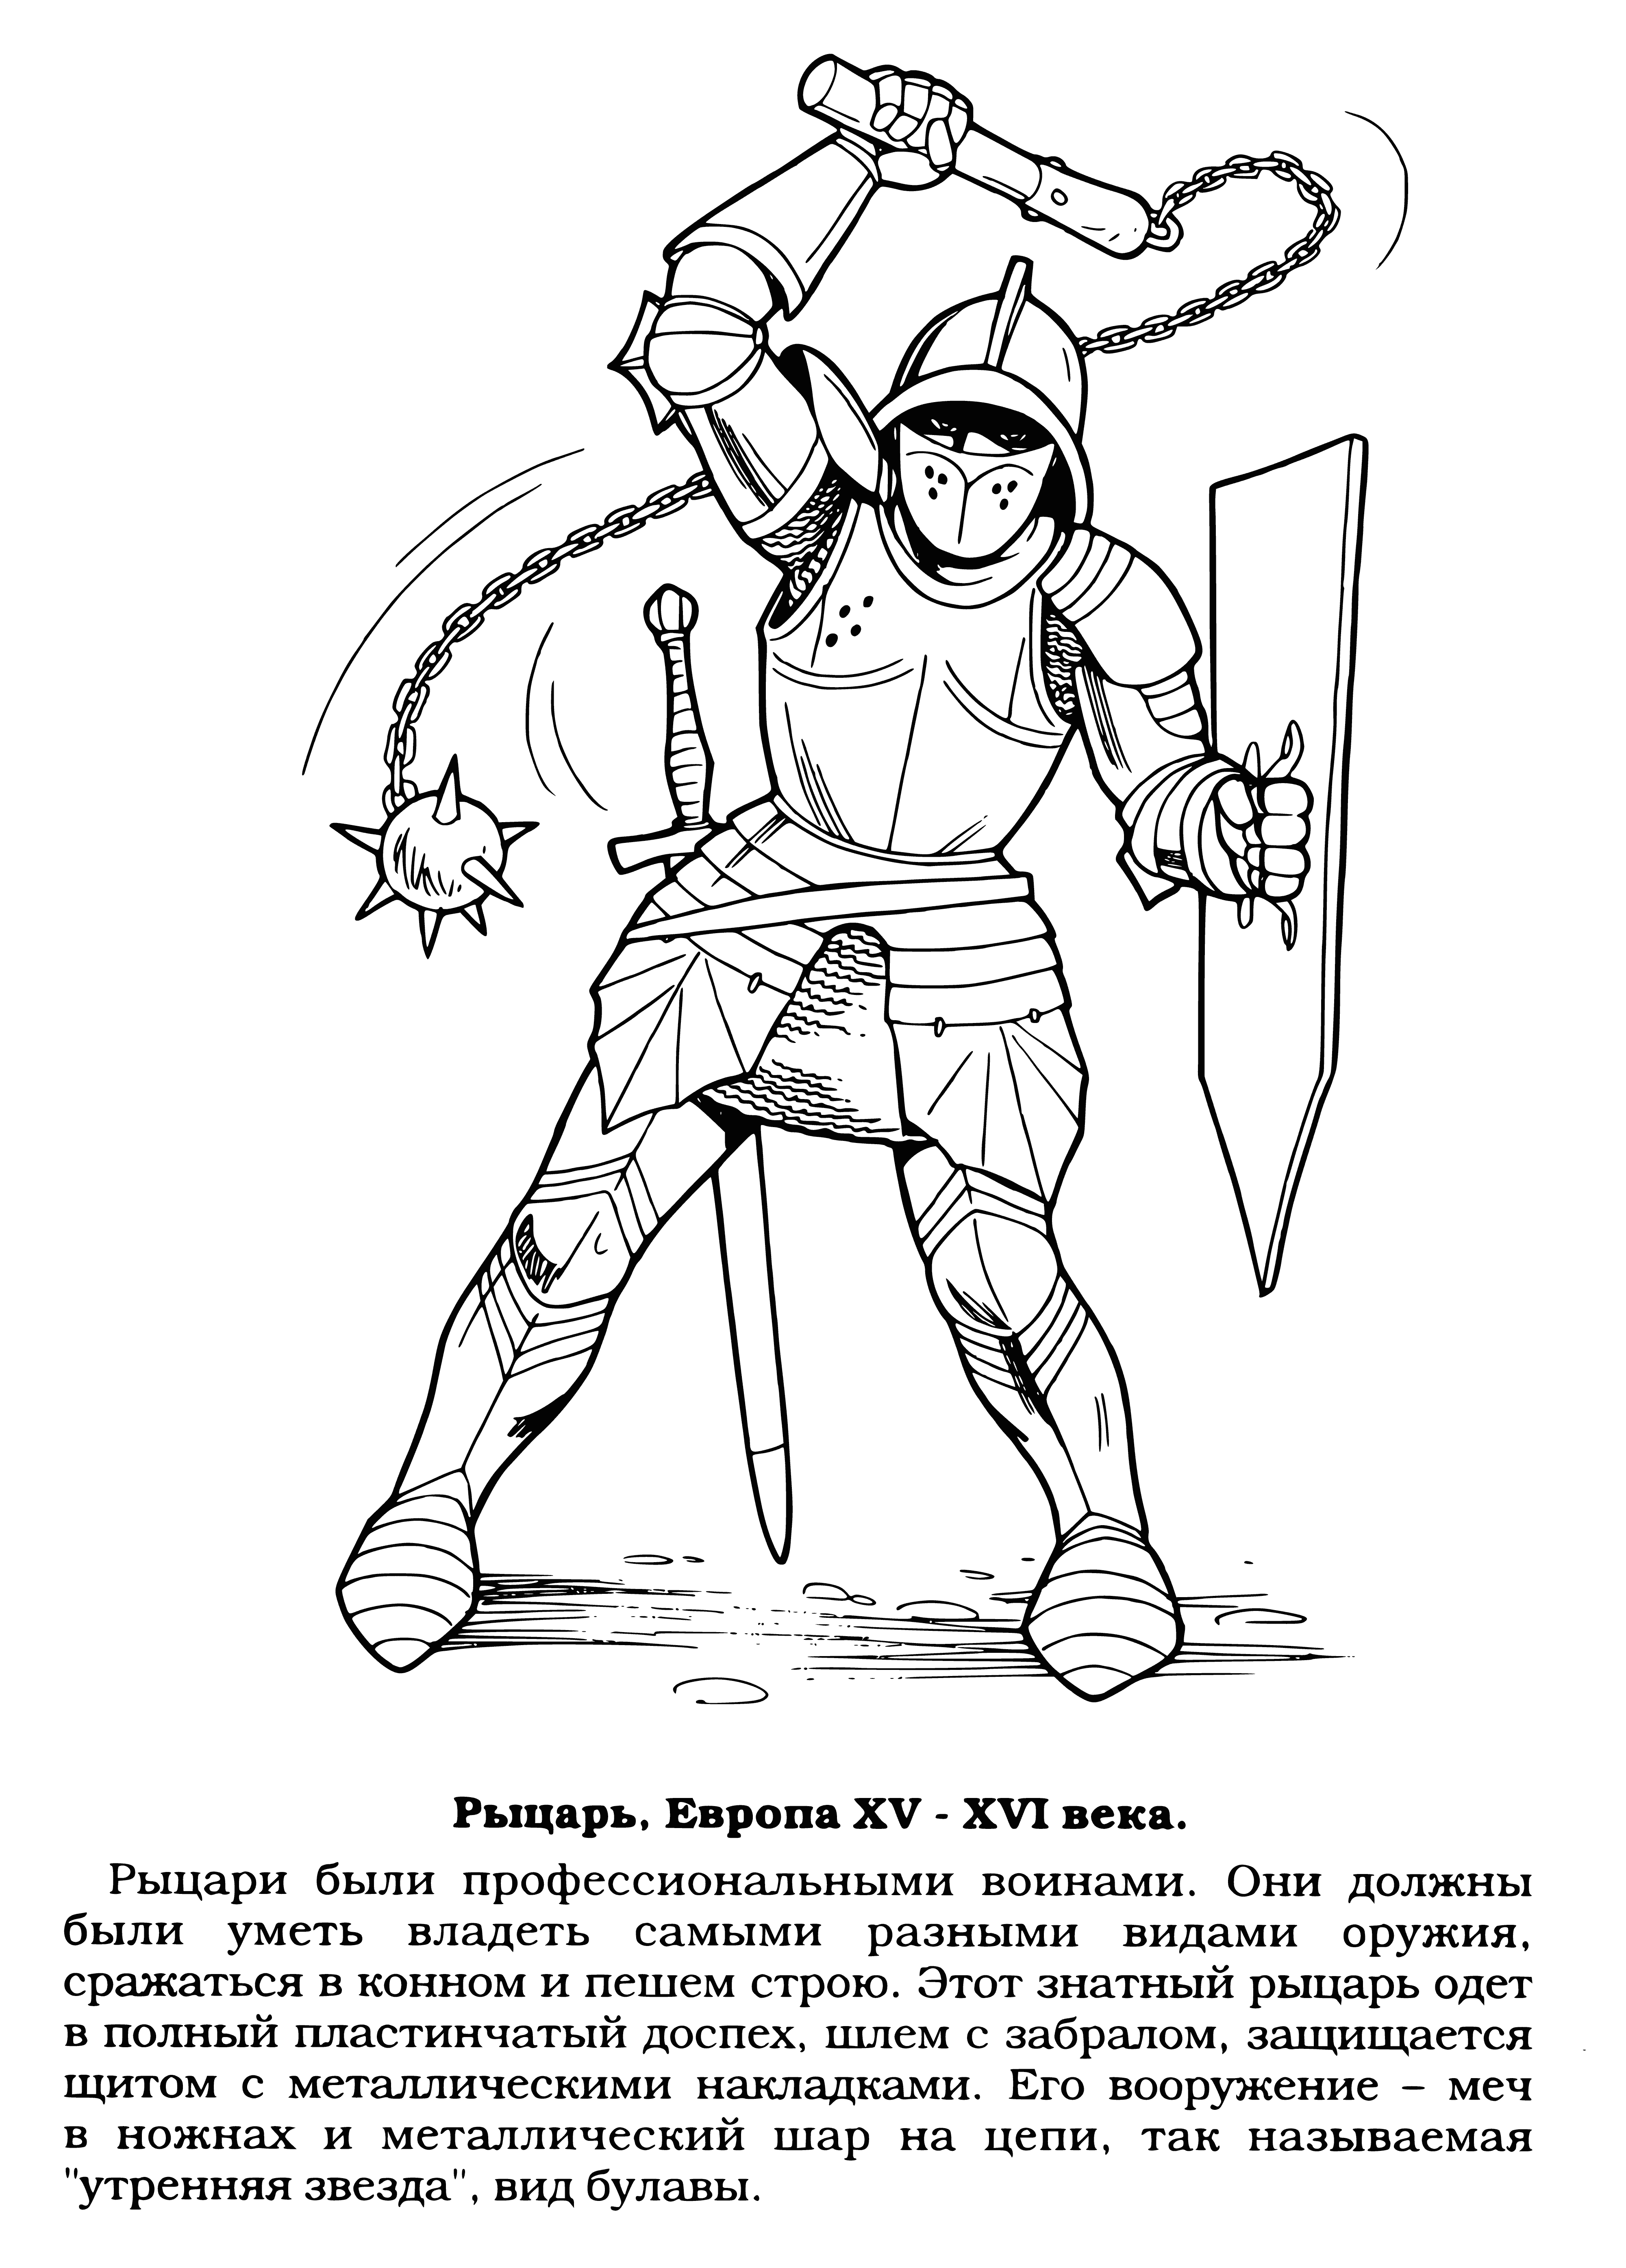 Knight with a mace coloring page